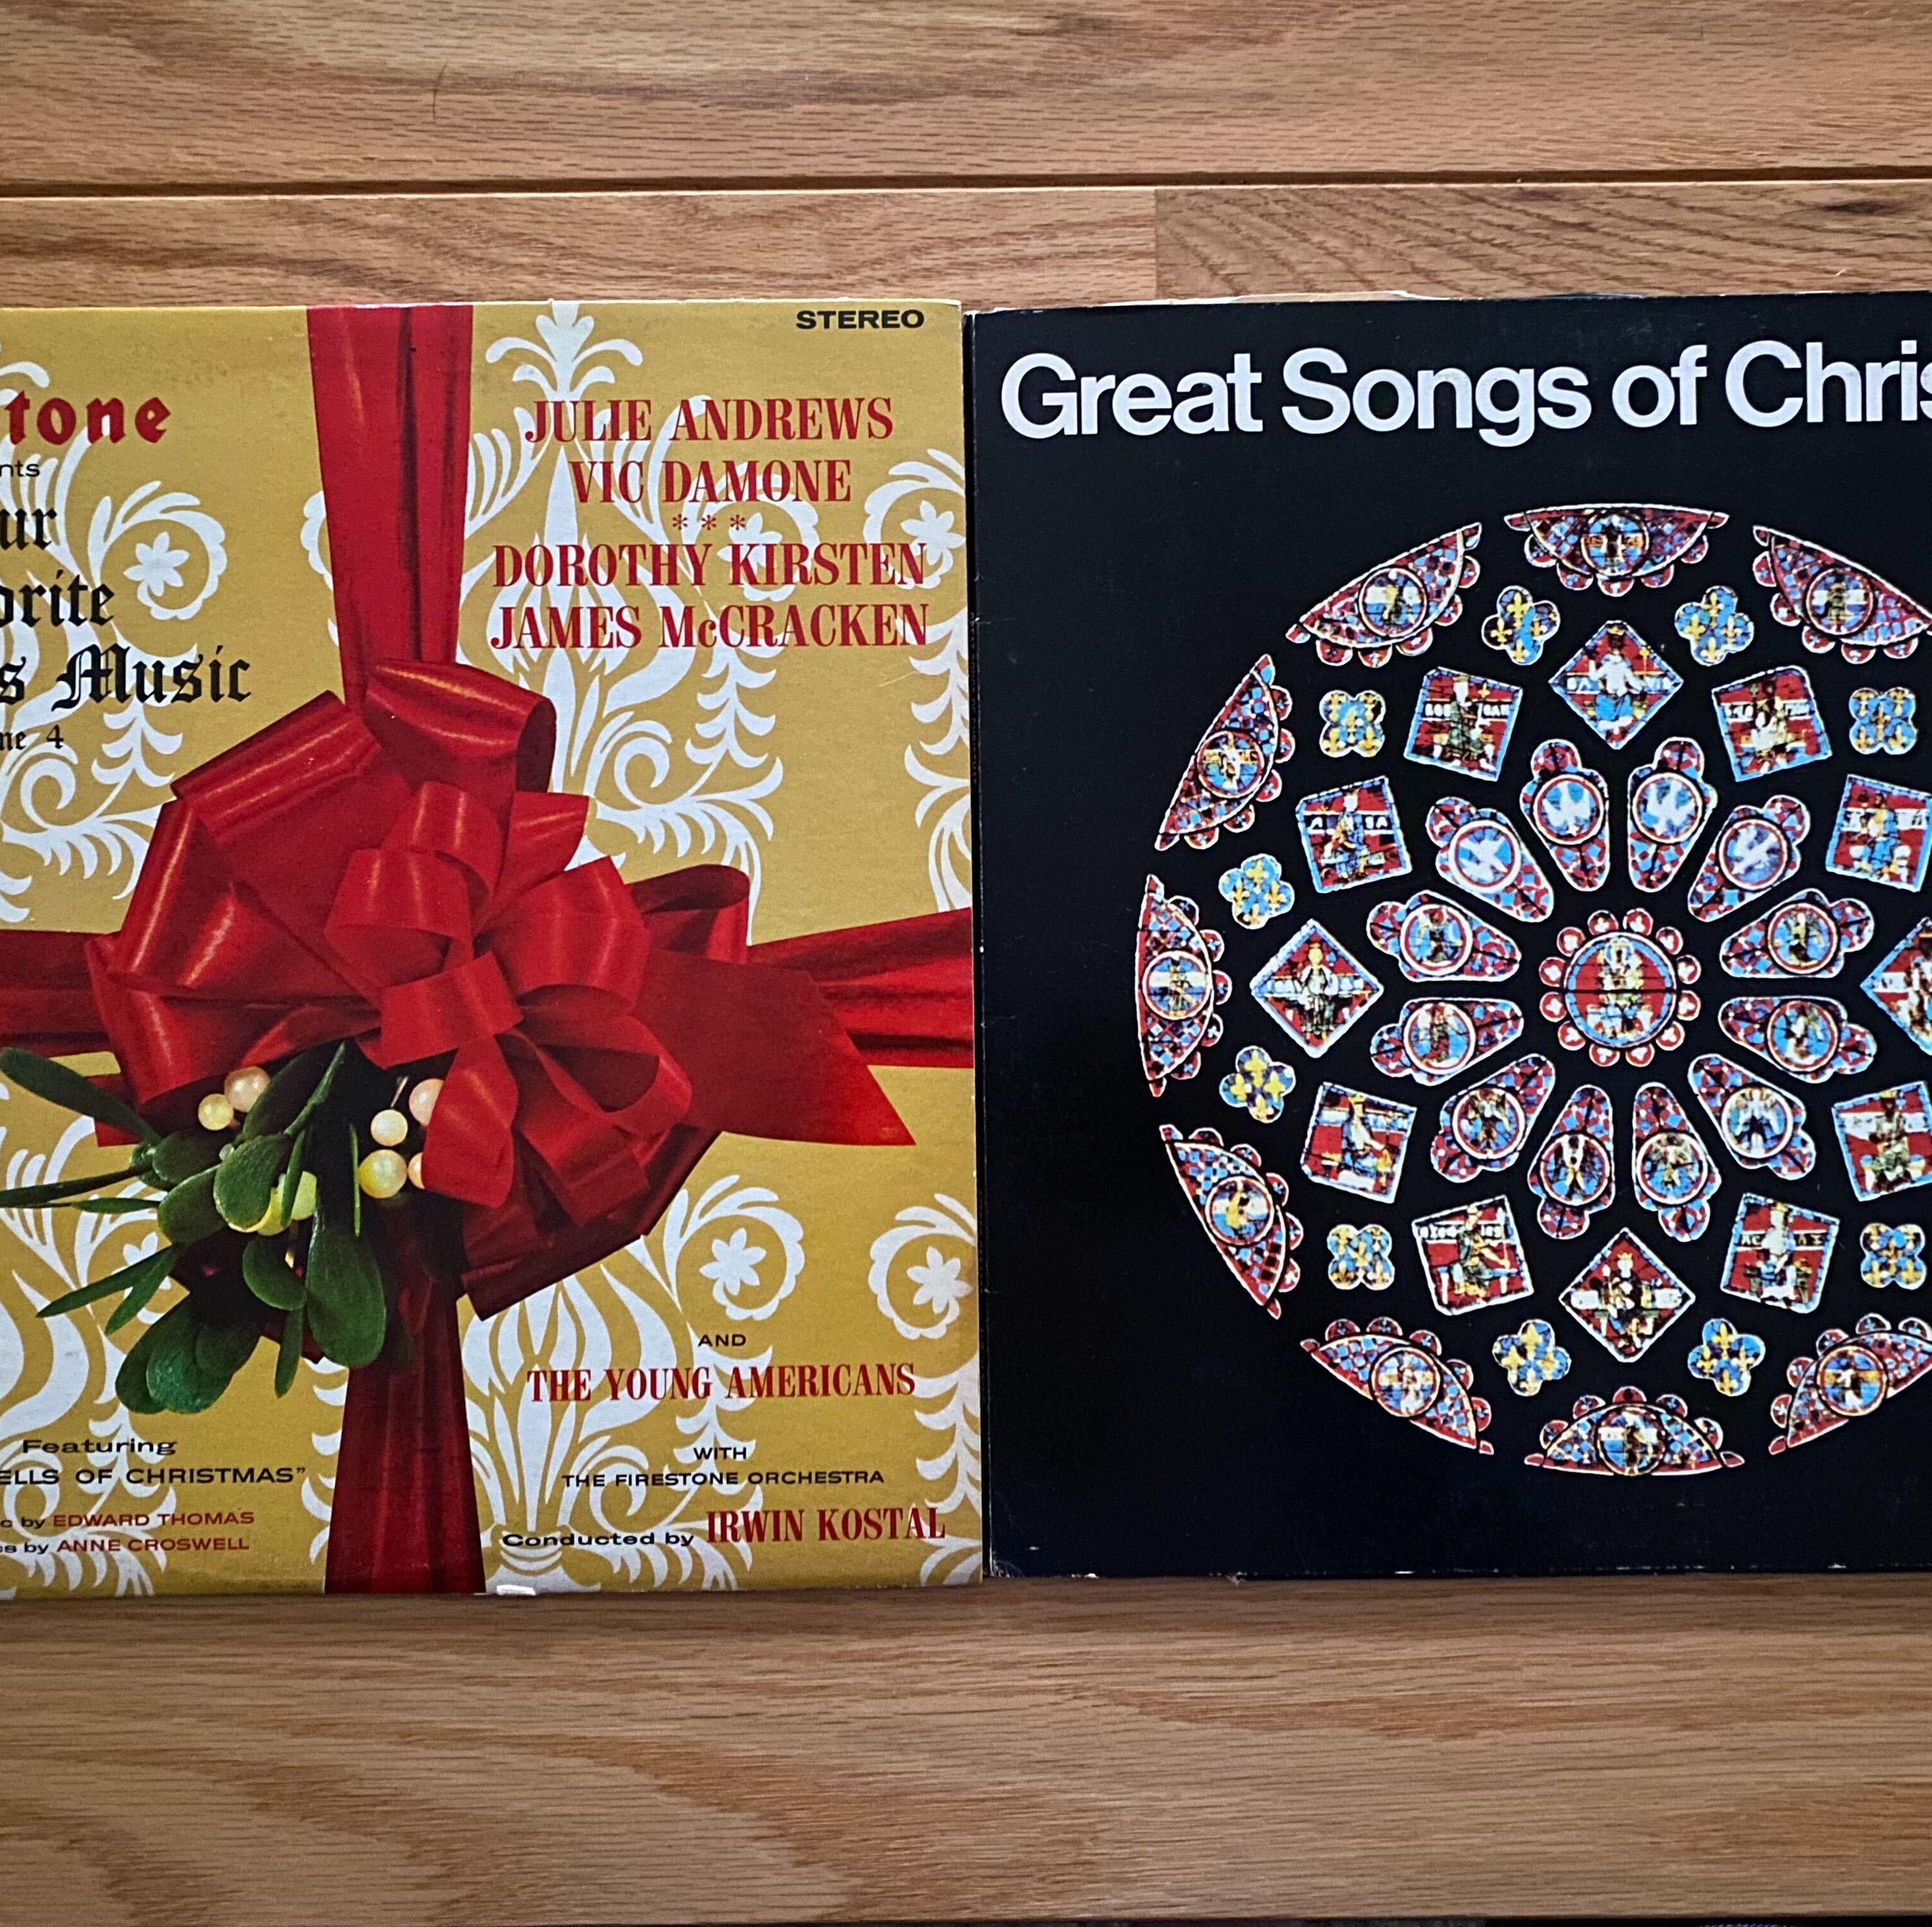 christmas silent night mormon tabernacle choir greatest hits of the albums